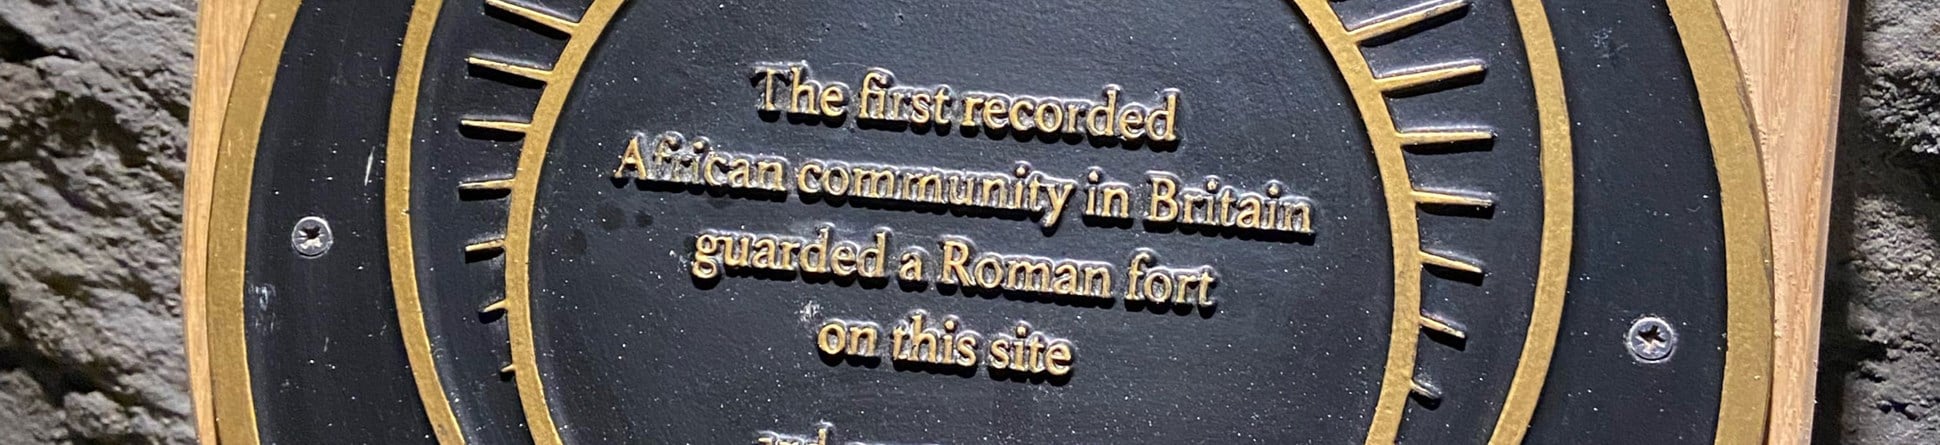 Detail of a plaque, which reads: T'he first recorded African community in Britain guarded a Roman fort on this site 3rd century AD'.